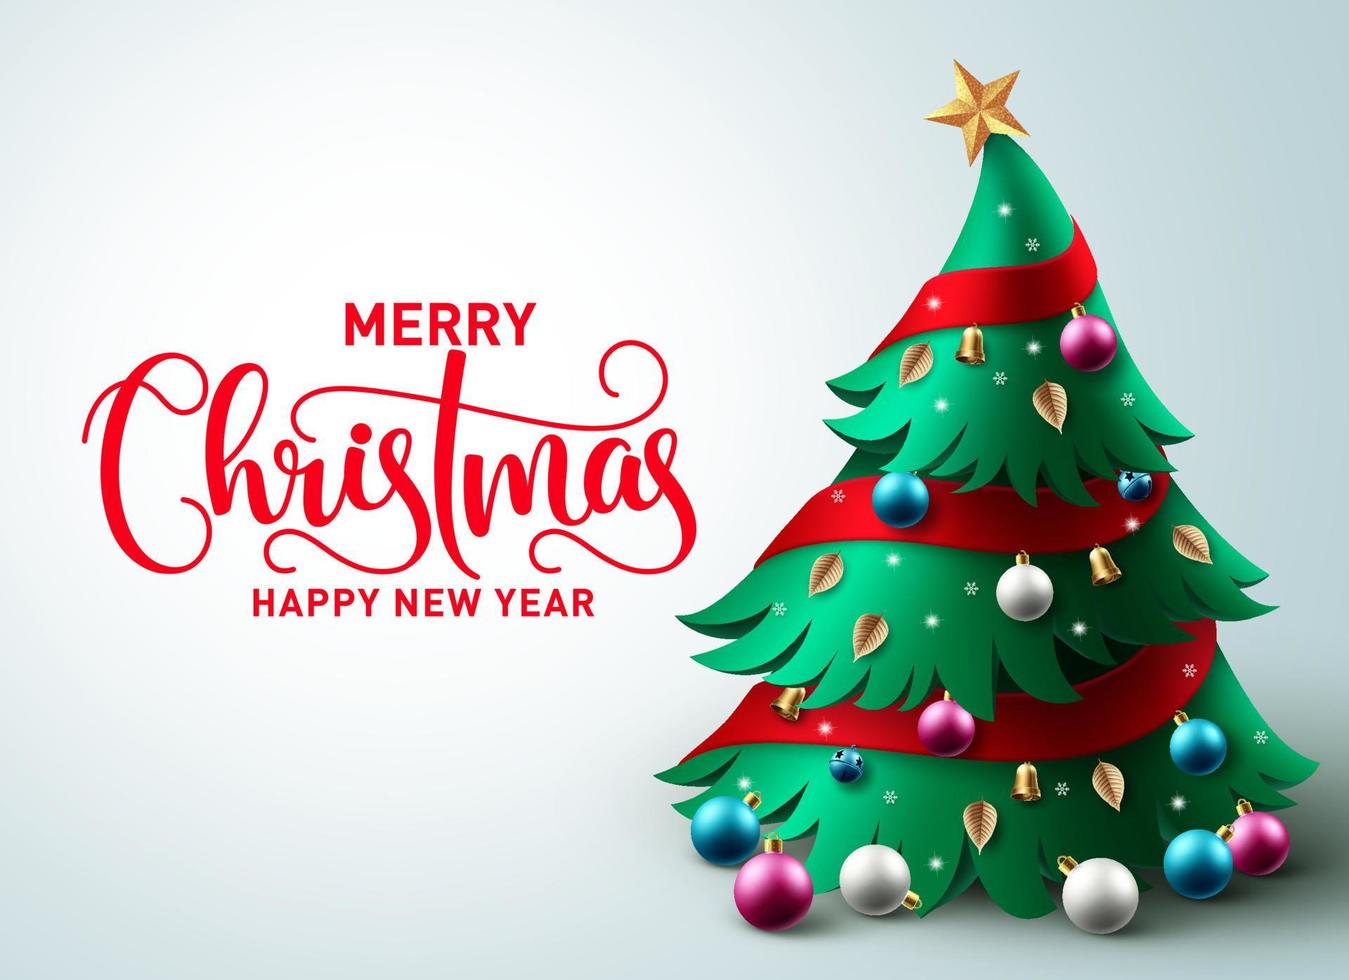 Christmas tree vector background design. Merry christmas greeting text in empty space with pine tree element and colorful ornaments for holiday season card decoration. Vector illustration.